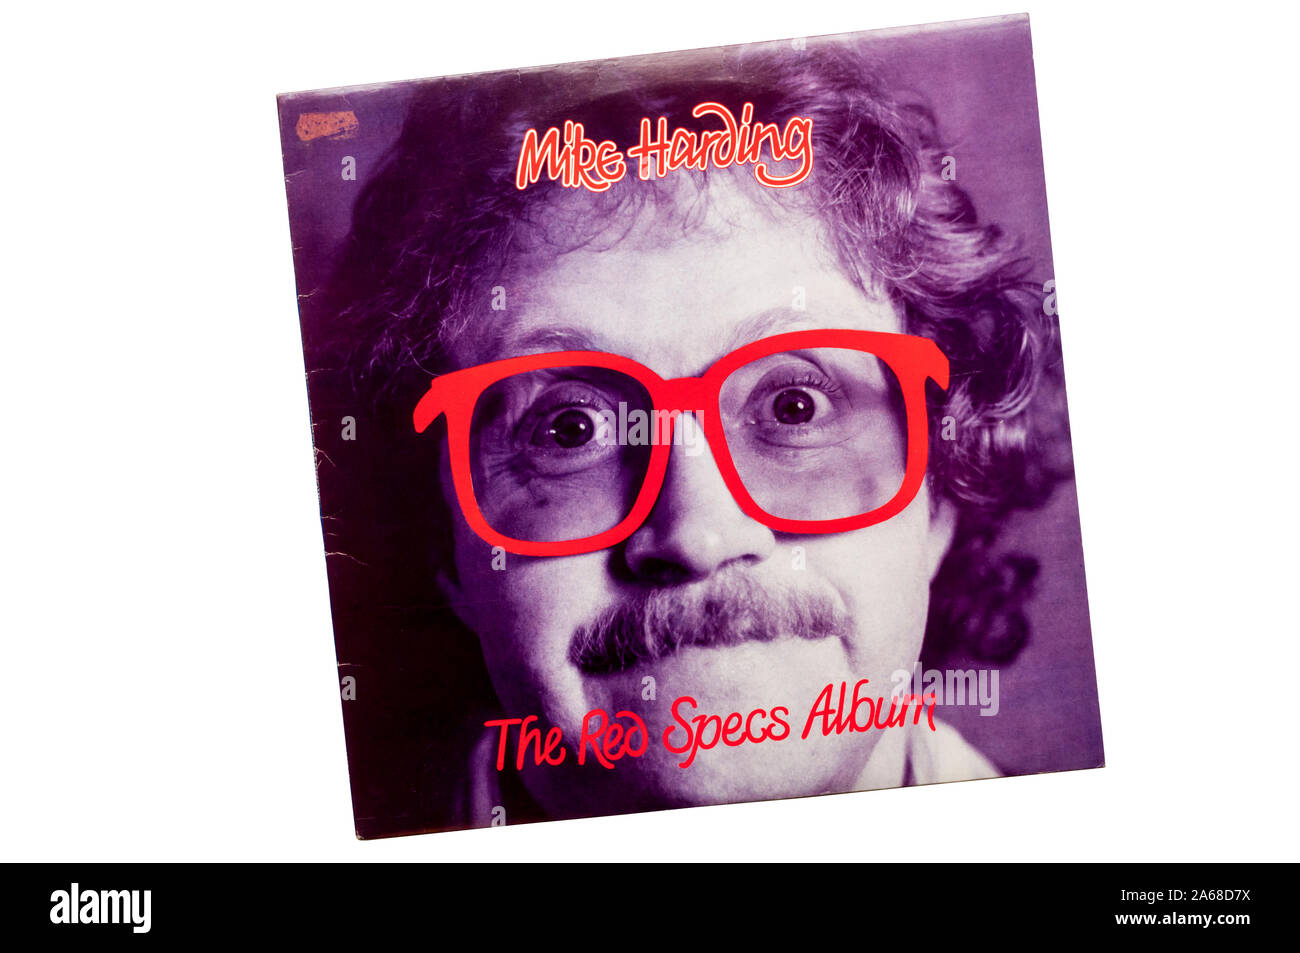 The Red Specs Album by Mike Harding, released in 1981. Stock Photo